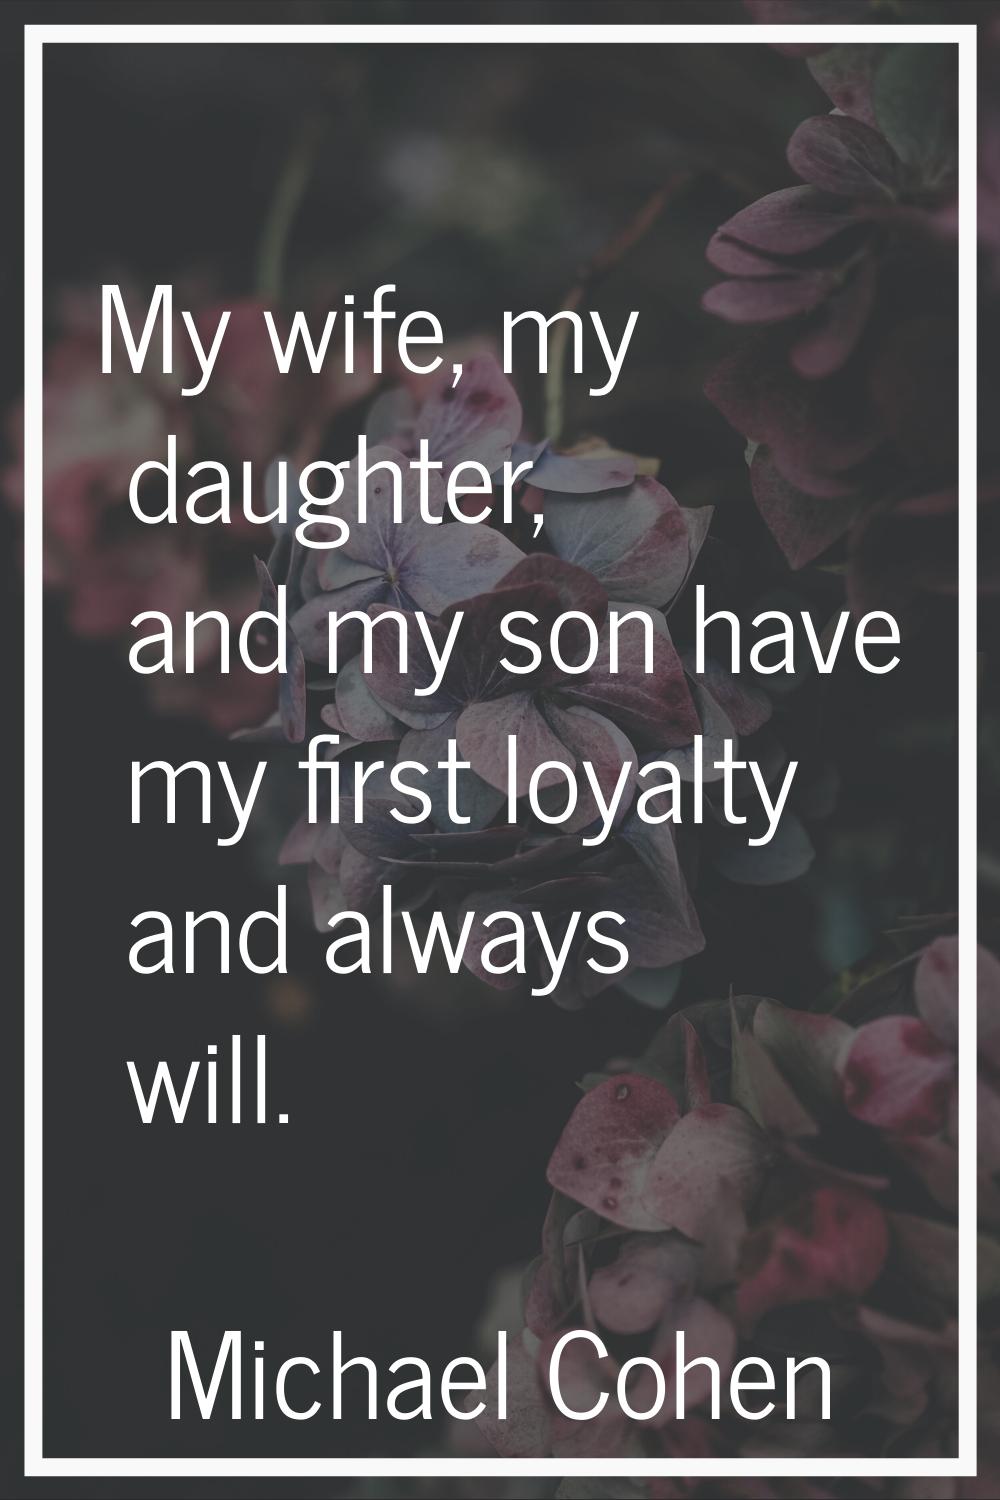 My wife, my daughter, and my son have my first loyalty and always will.